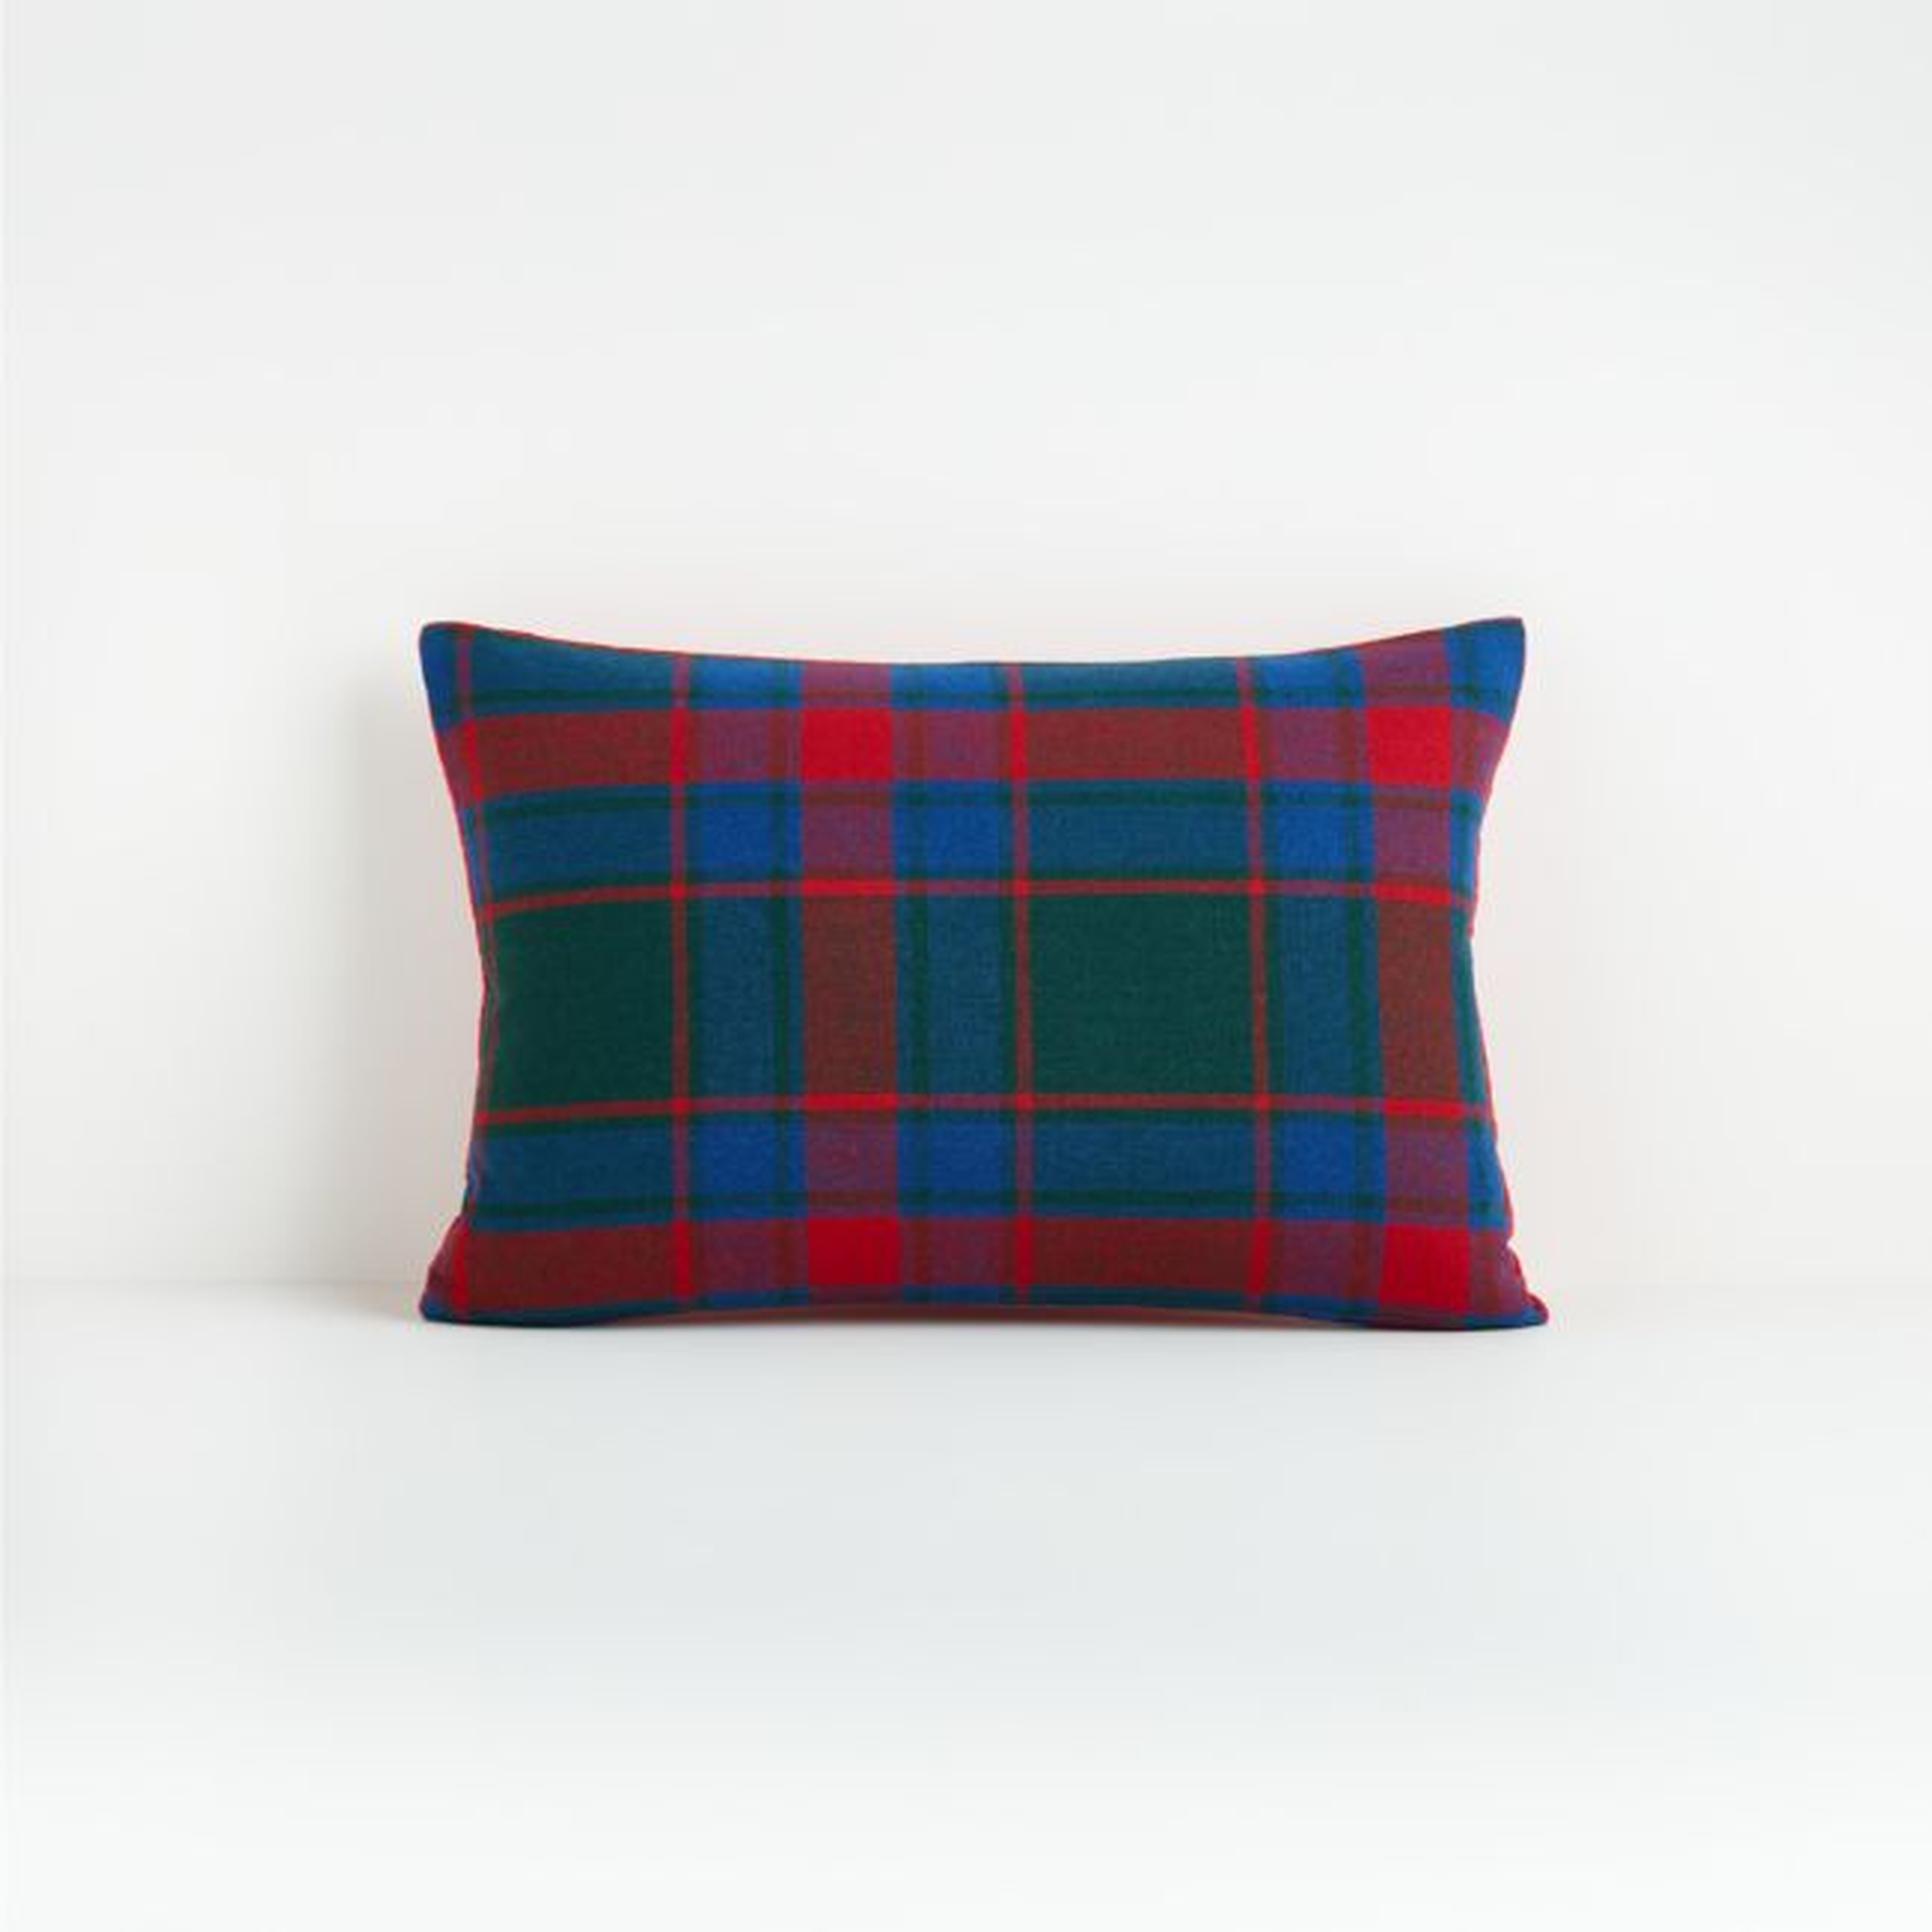 Dara 18"x12" Plaid Pillow with Feather-Down Insert - Crate and Barrel